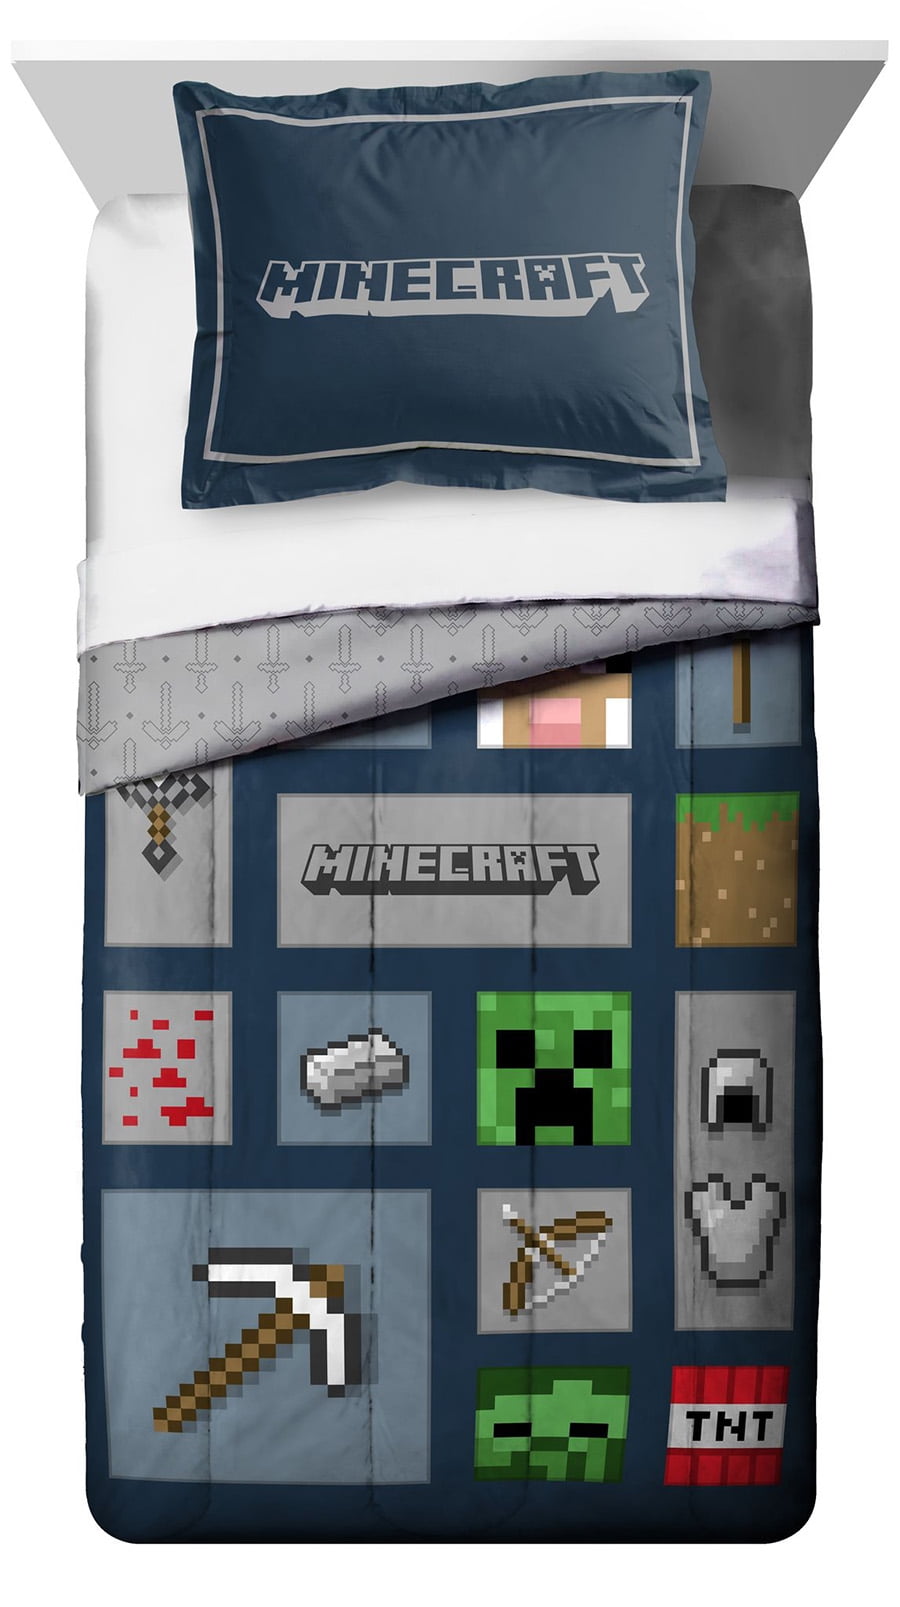 NEW MINECRAFT TWIN BED SHEET SET FLAT FITTED AND PILLOWCASE BEDDING SUPER SOFT